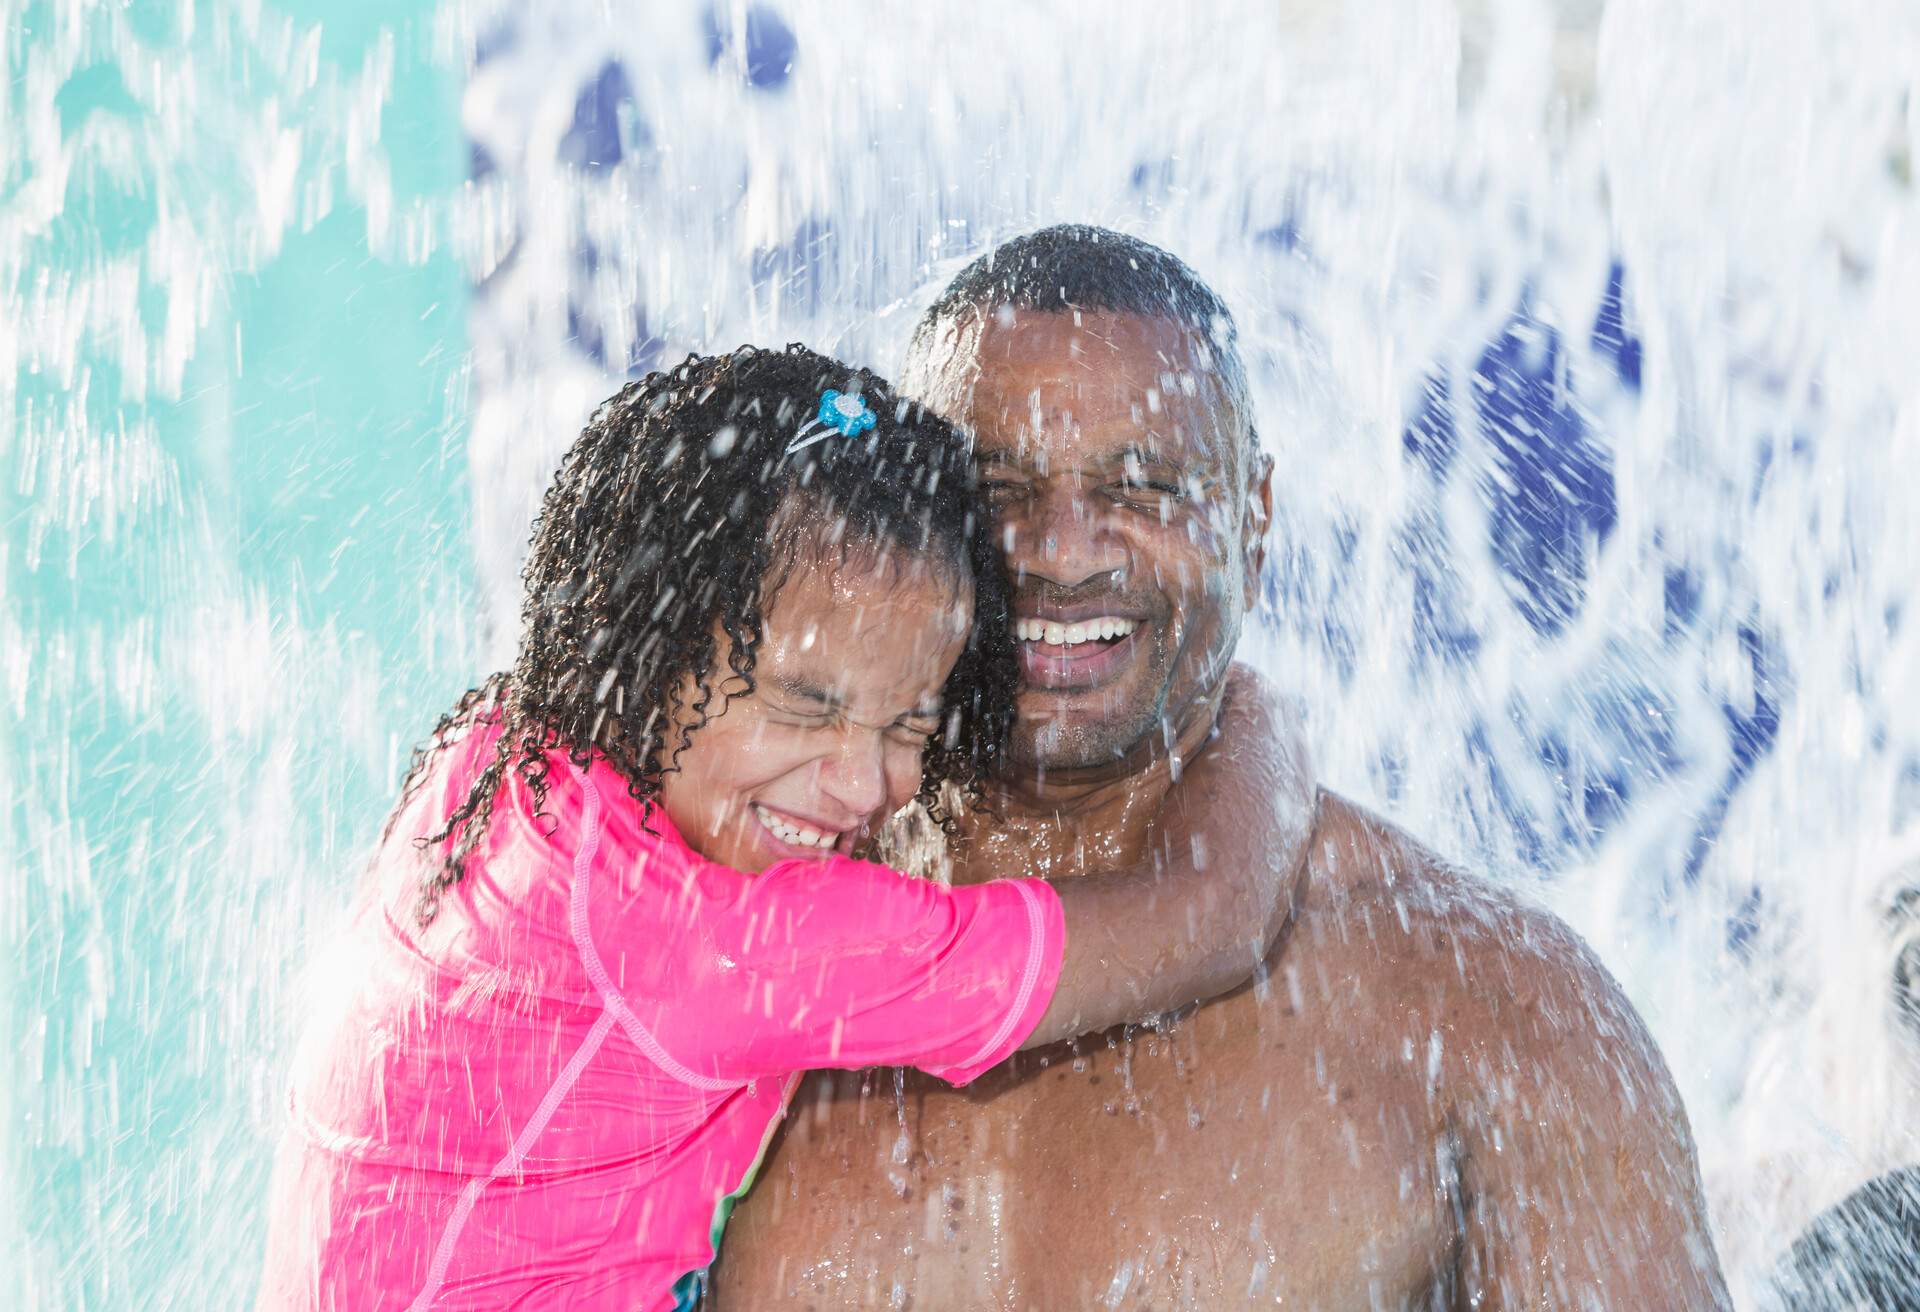 An African-American father having fun at the water park with his 7 year old mixed race daughter. The little girl's arms are wrapped around daddy's neck. They are under a waterfall smiling with their eyes shut tightly to keep the water out.